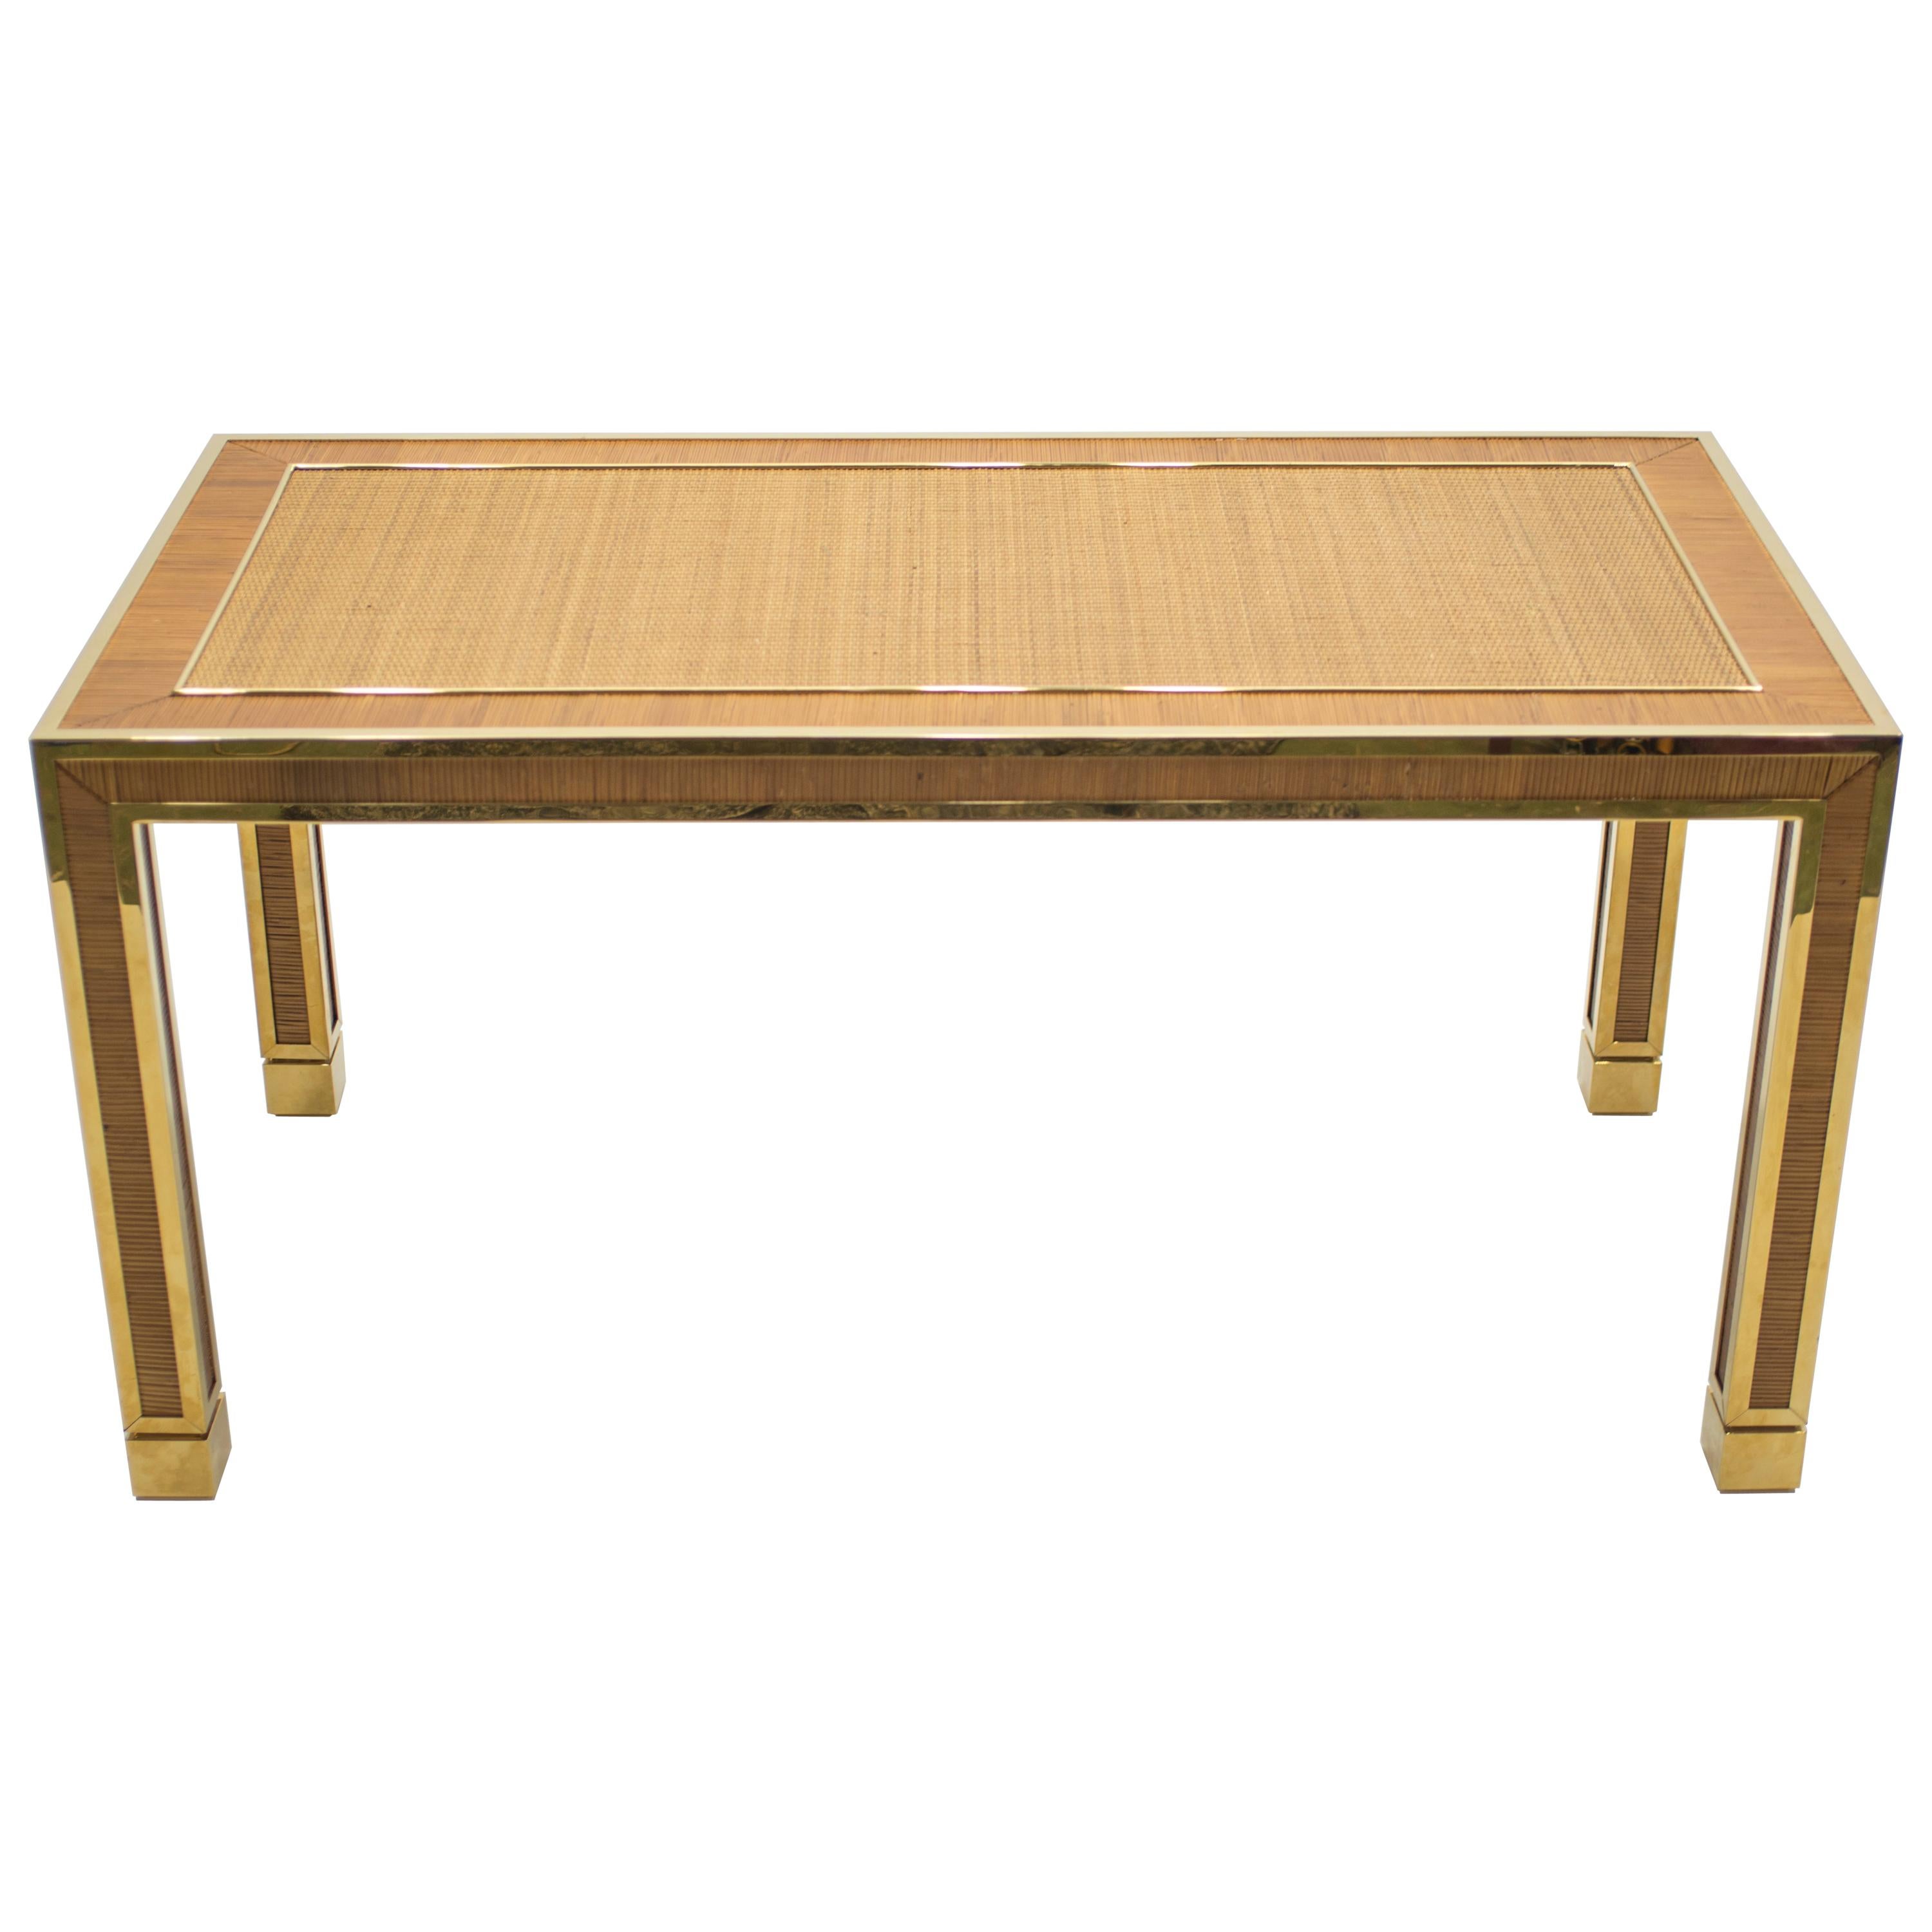 Italian Brass and Bamboo Dining Table or Desk, 1970s